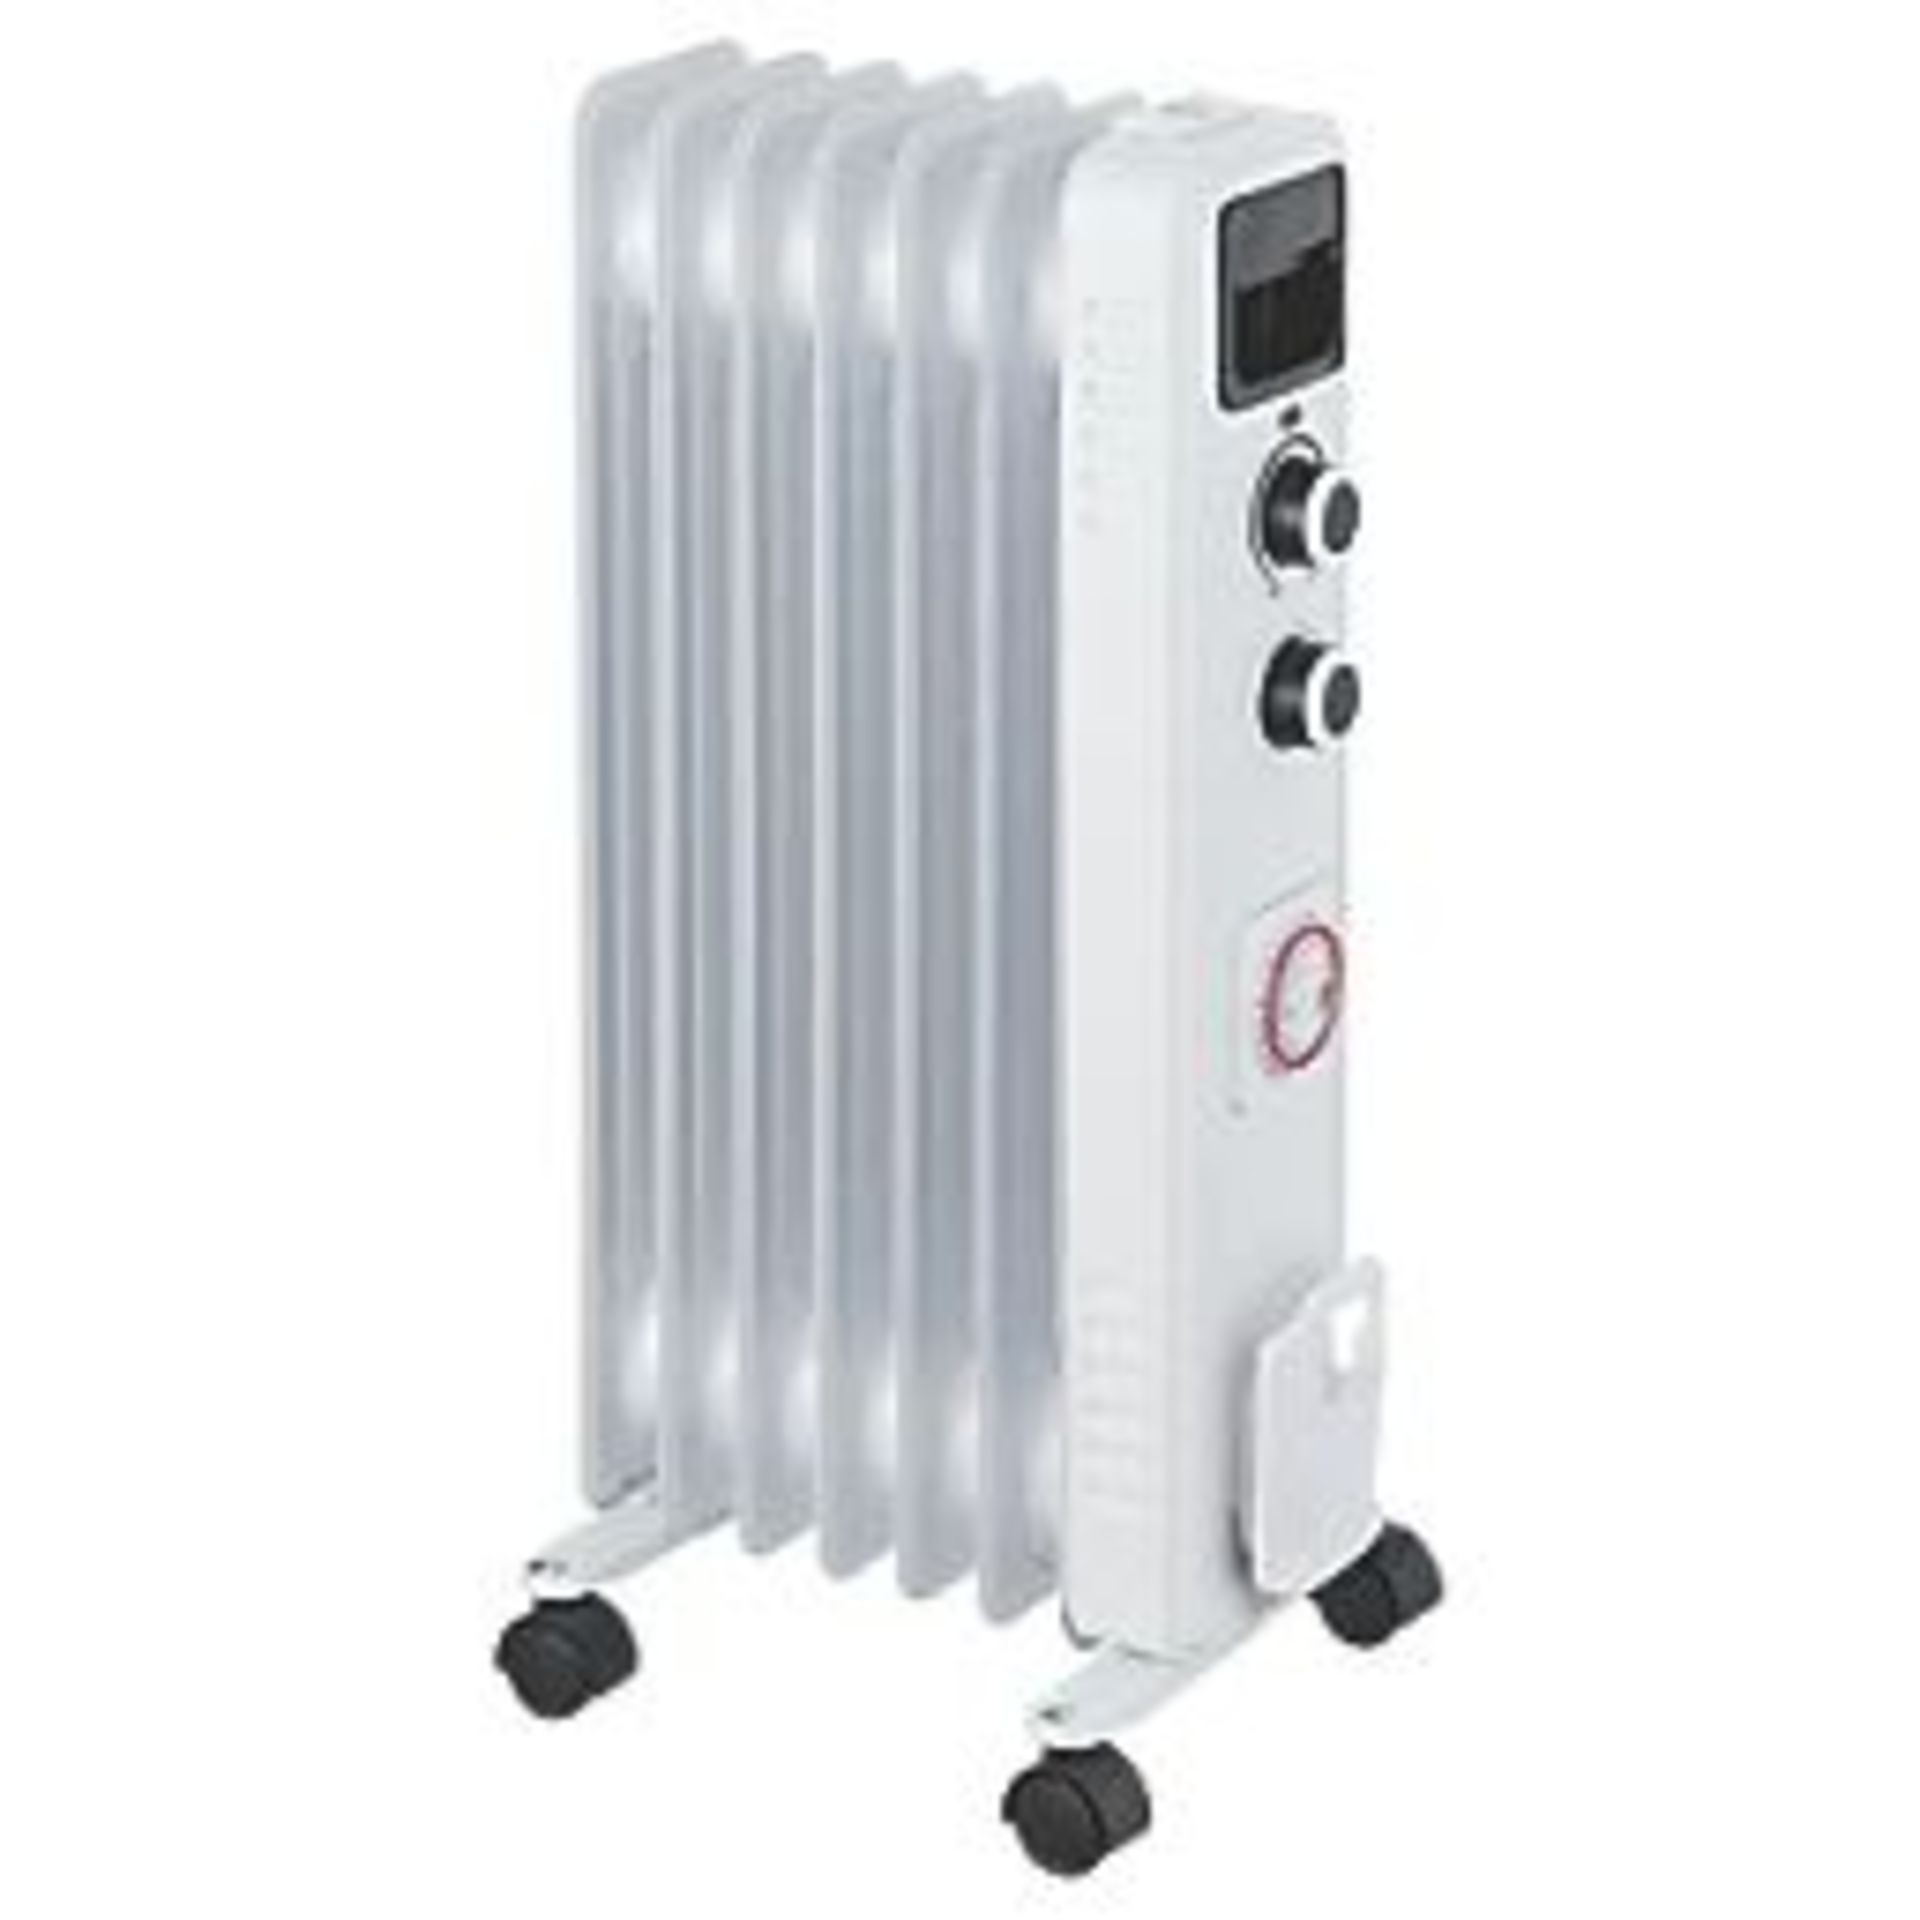 FREESTANDING 7-FIN OIL-FILLED RADIATOR WITH TIMER 1500W. - ER42. Oil-filled radiator with wheels for